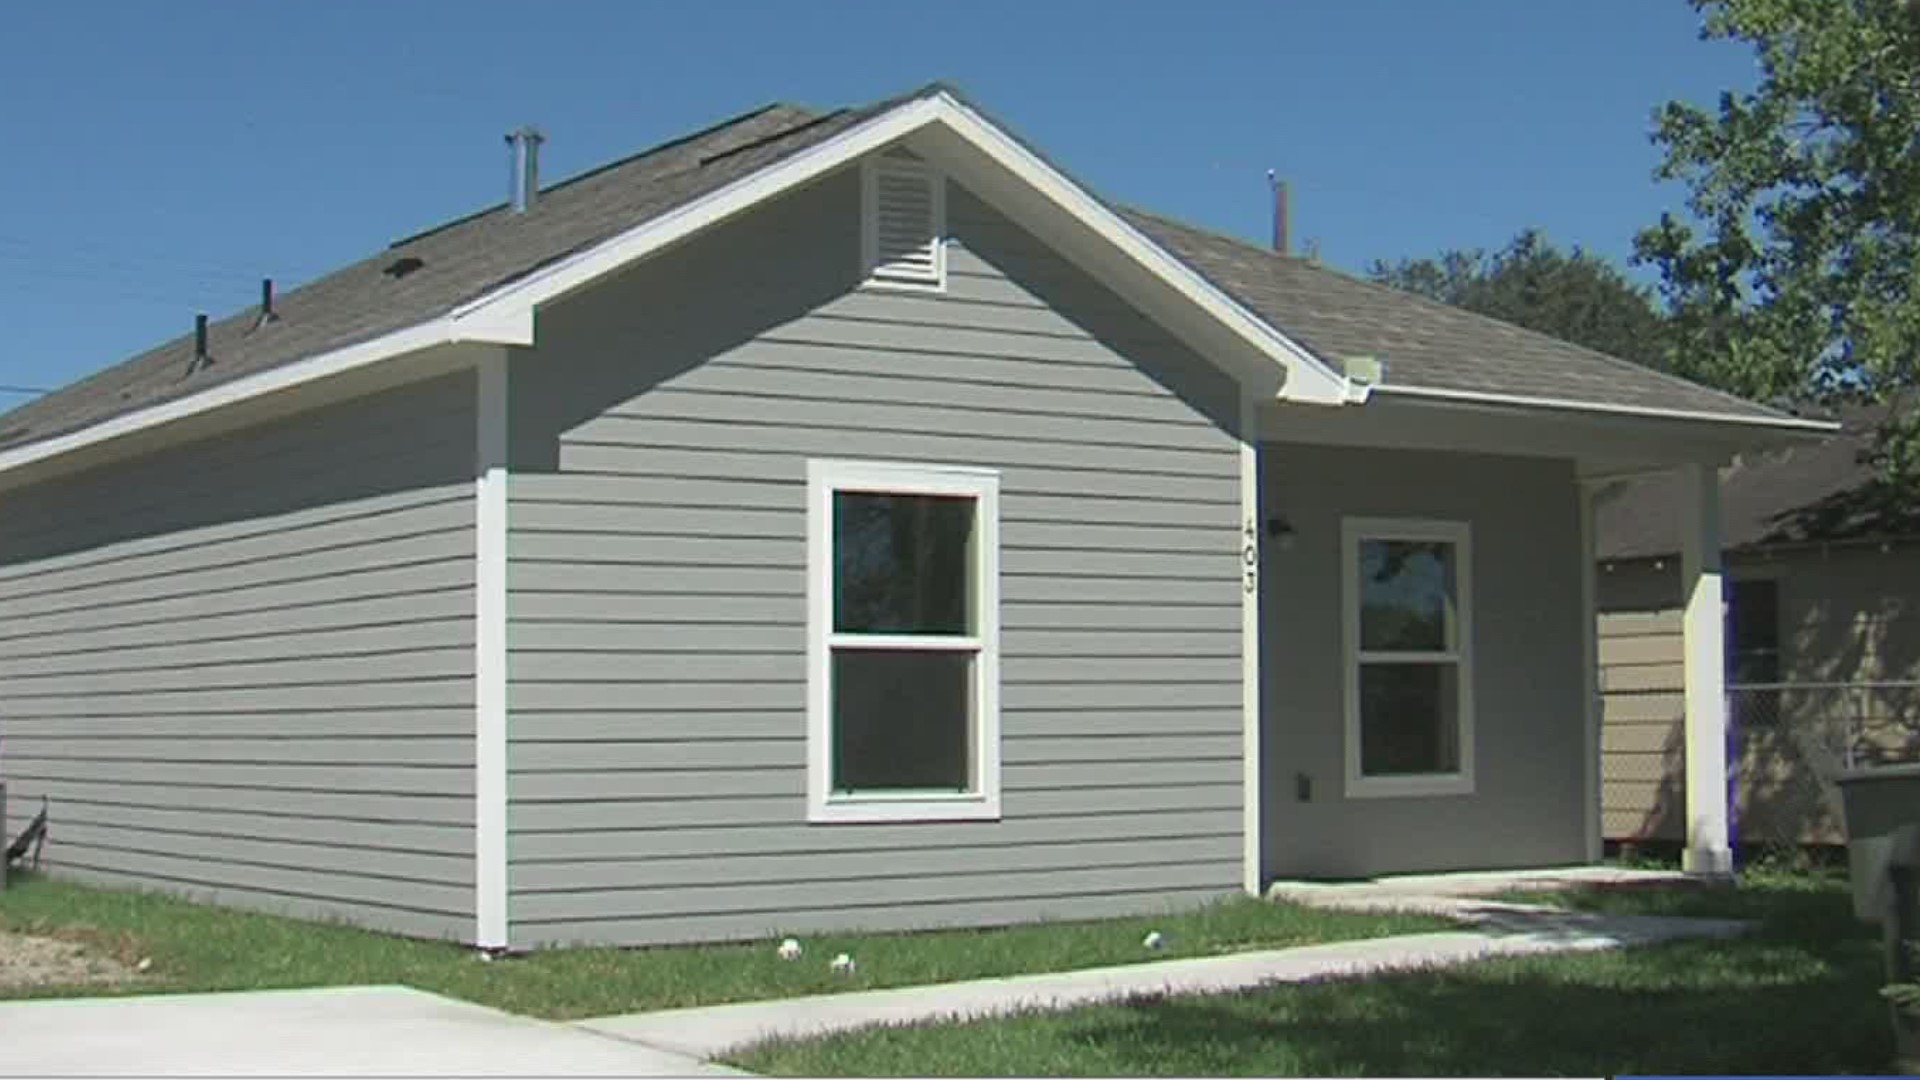 With the help of the community and filling out the right applications, the Texas General Land Office granted her money for a brand new house.